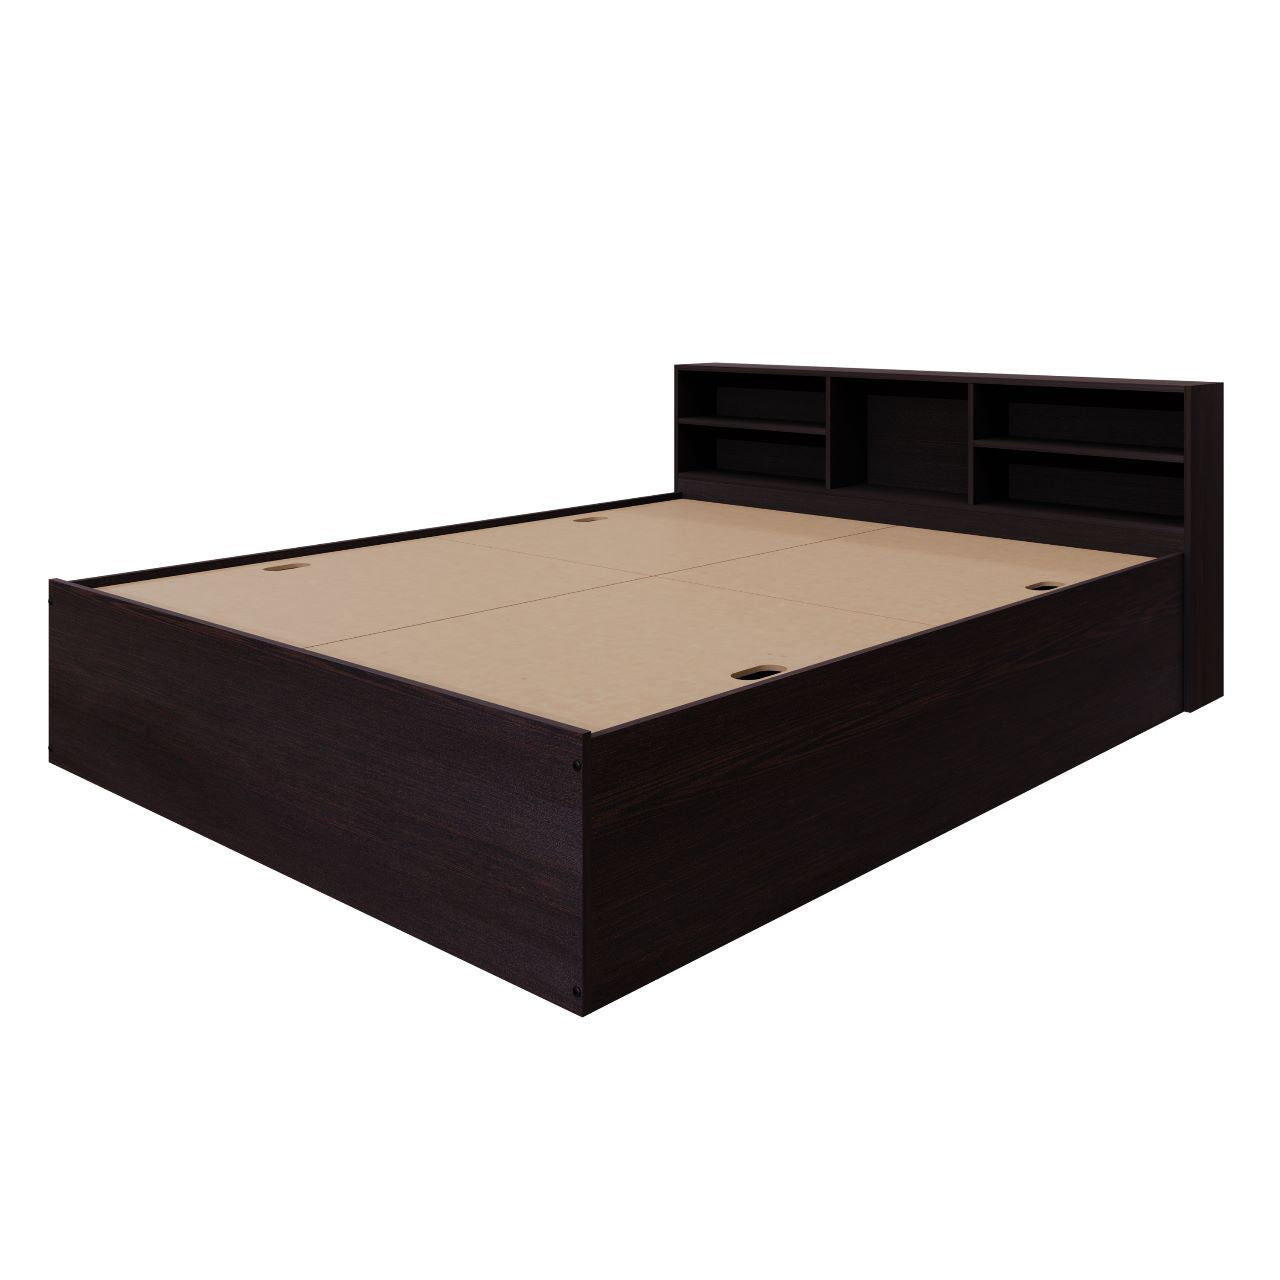 VIKI Engineered Wood Bed With Shelf (Queen size)-2100x1700x800-Frosty white & Wenge Bedroom Furniture Sets VIKI FURNITURE   